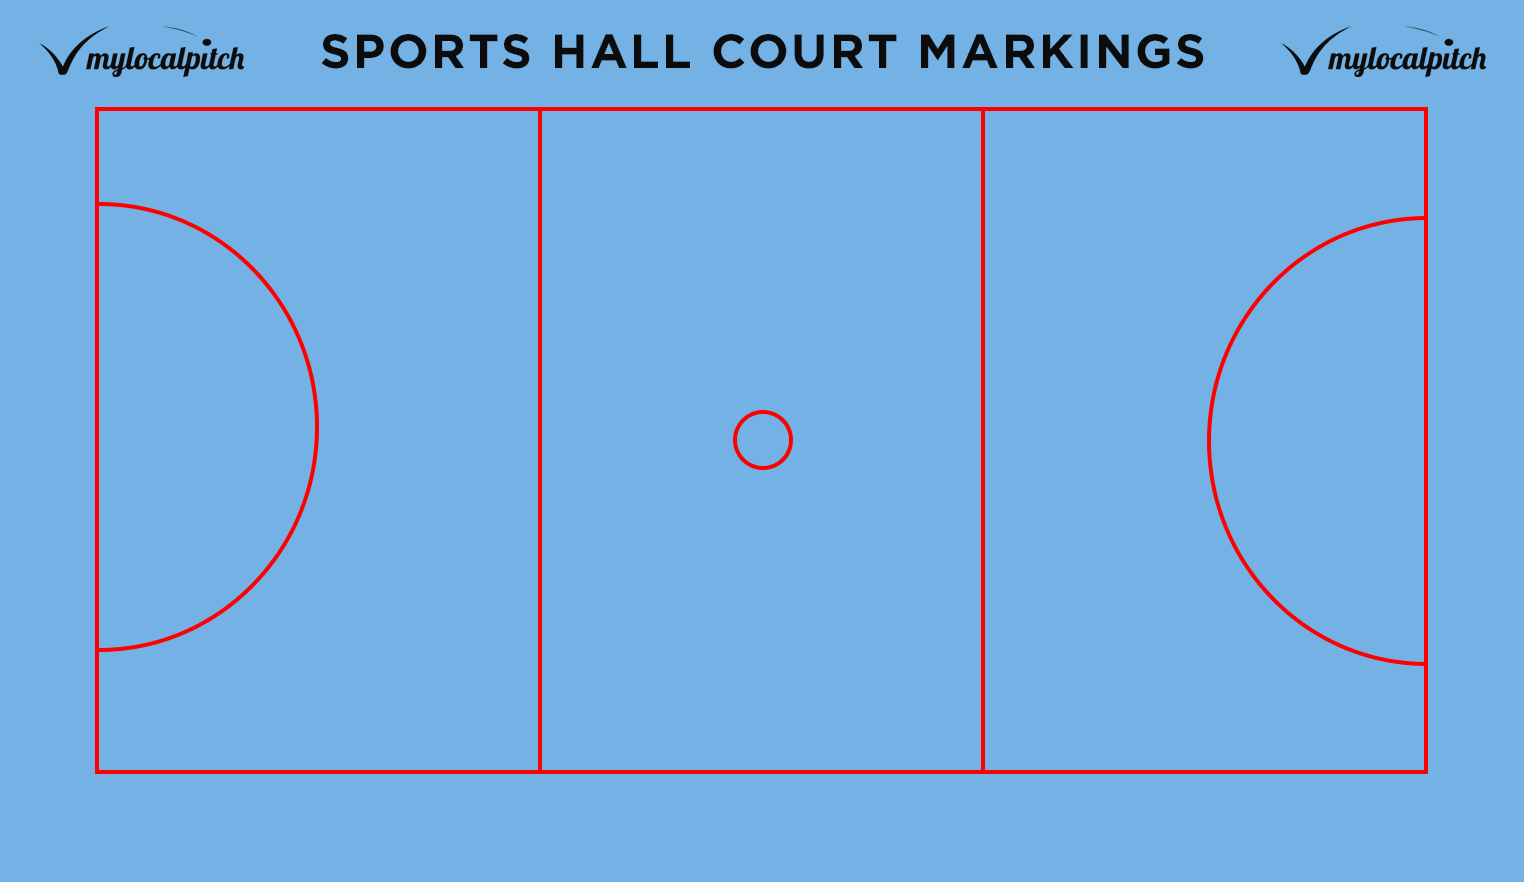 Sports hall court markings